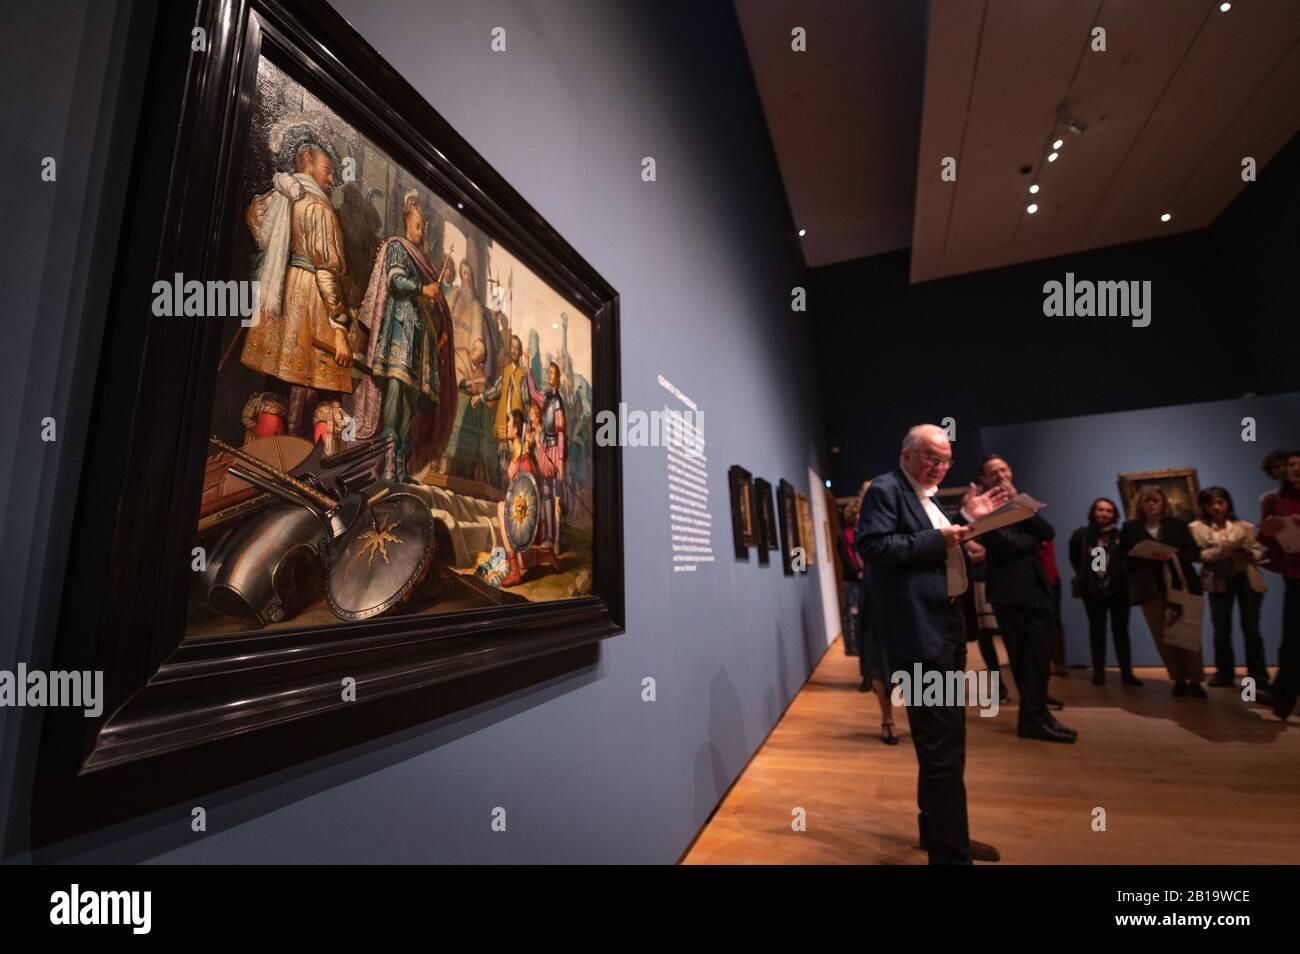 Oxford, UK. Monday 24th February 2020. Launch of the Young Rembrandt exhibition at The Ashmolean Museum, Oxford. Credit: Andrew Walmsley/Alamy Live News Stock Photo